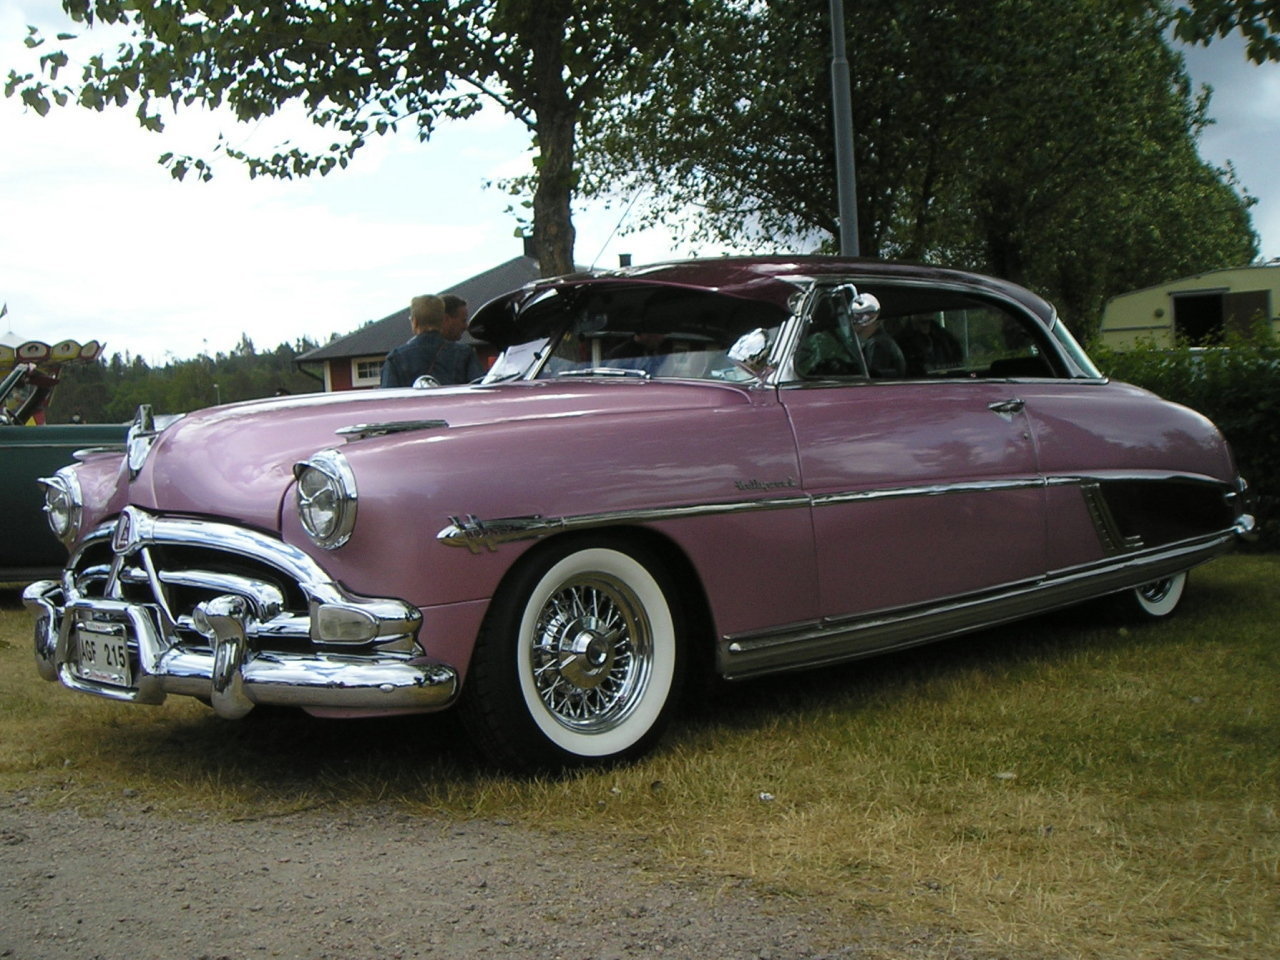 Hudson Hornet Hollywood 2dr HT Photo Gallery: Photo #03 out of 7 ...